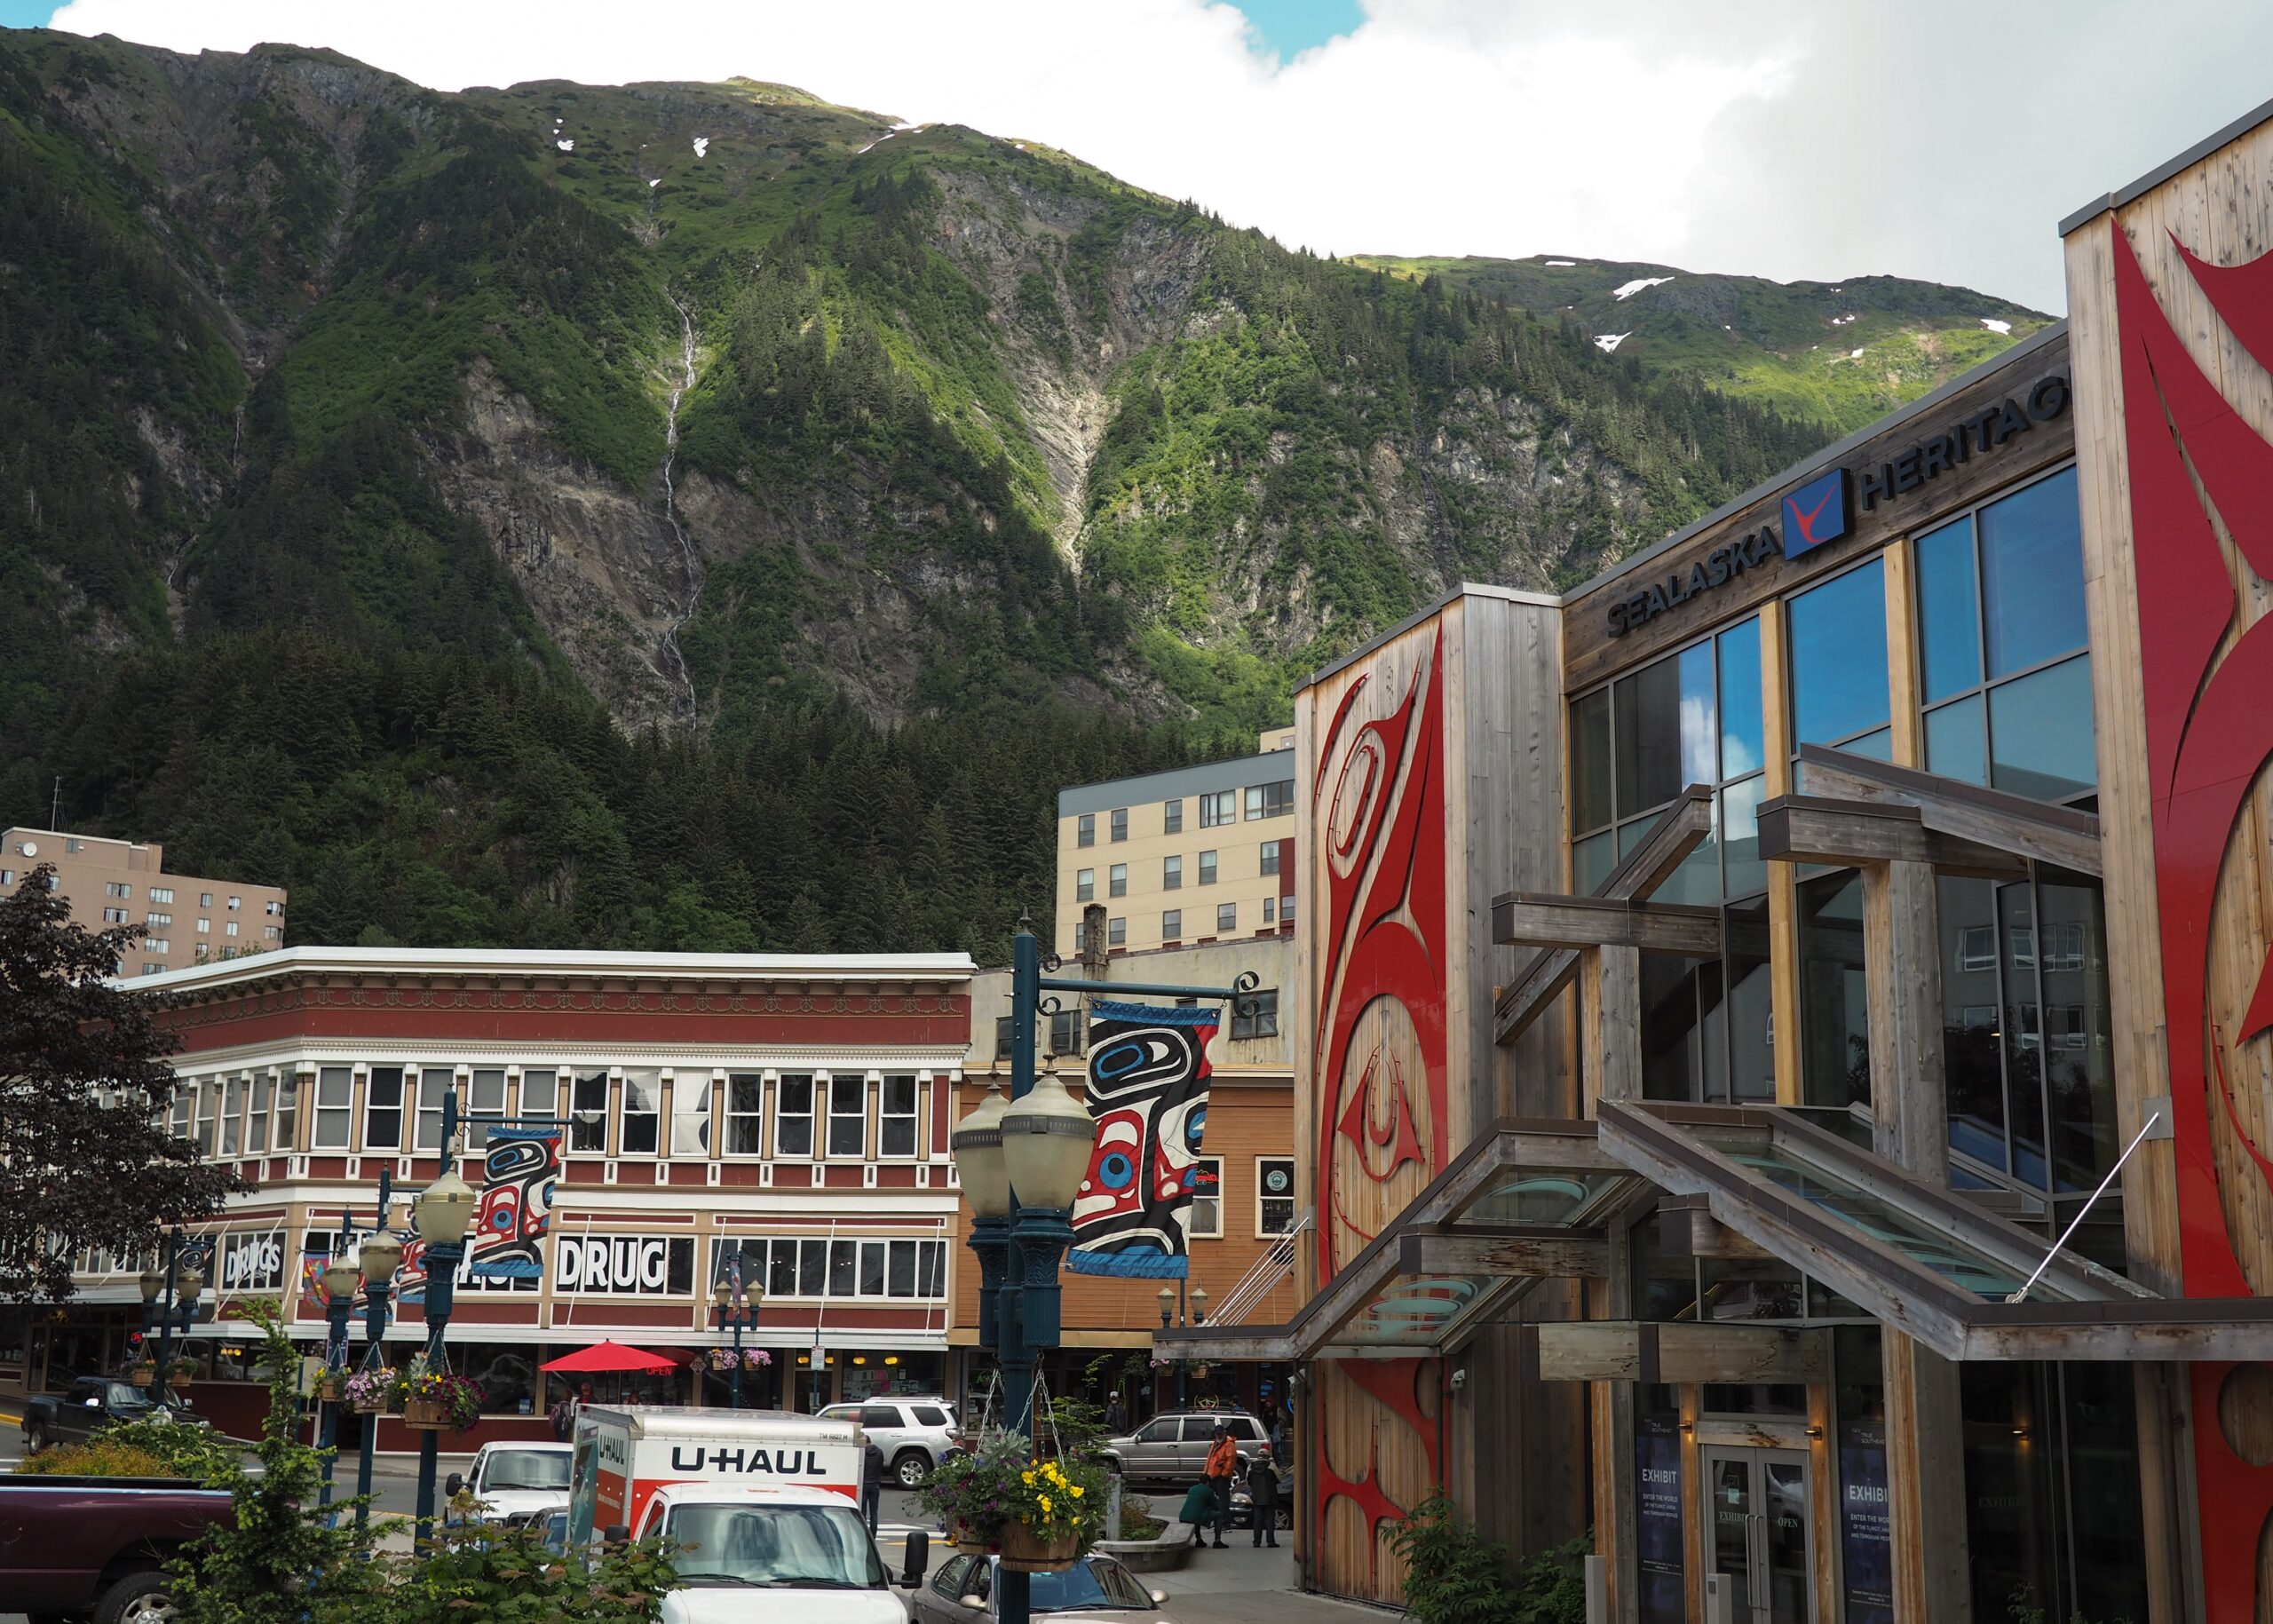 Juneau is one of the best places to live in Alaska for those who are interested in outdoor recreational activities. Pictured: A shot of Juneau, Alaska.